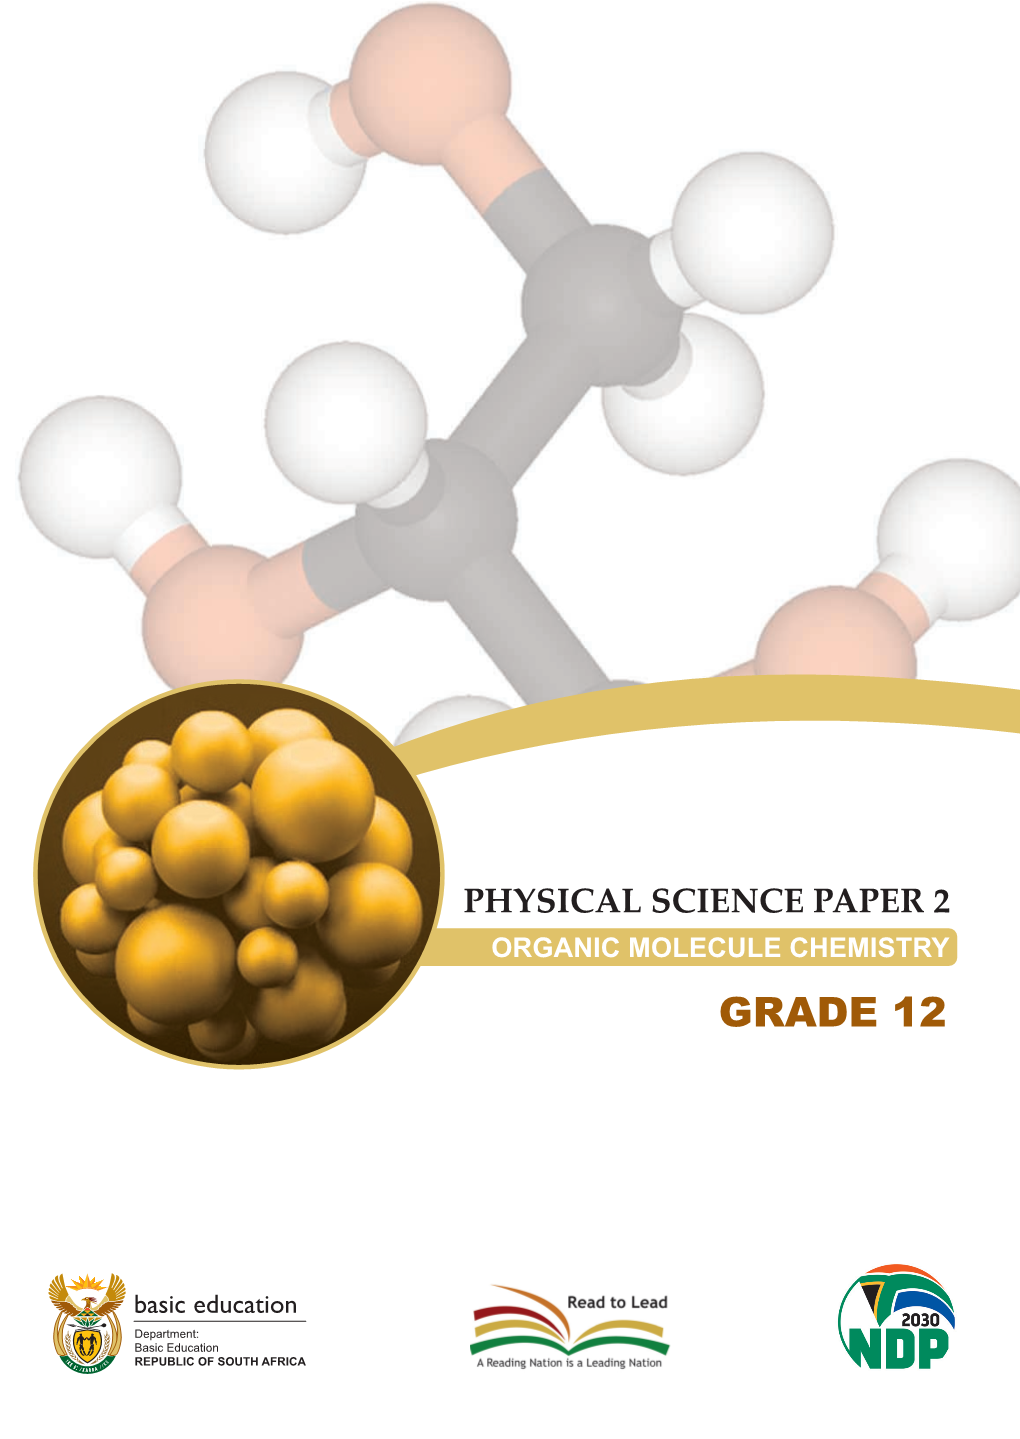 Physical Sciences Content